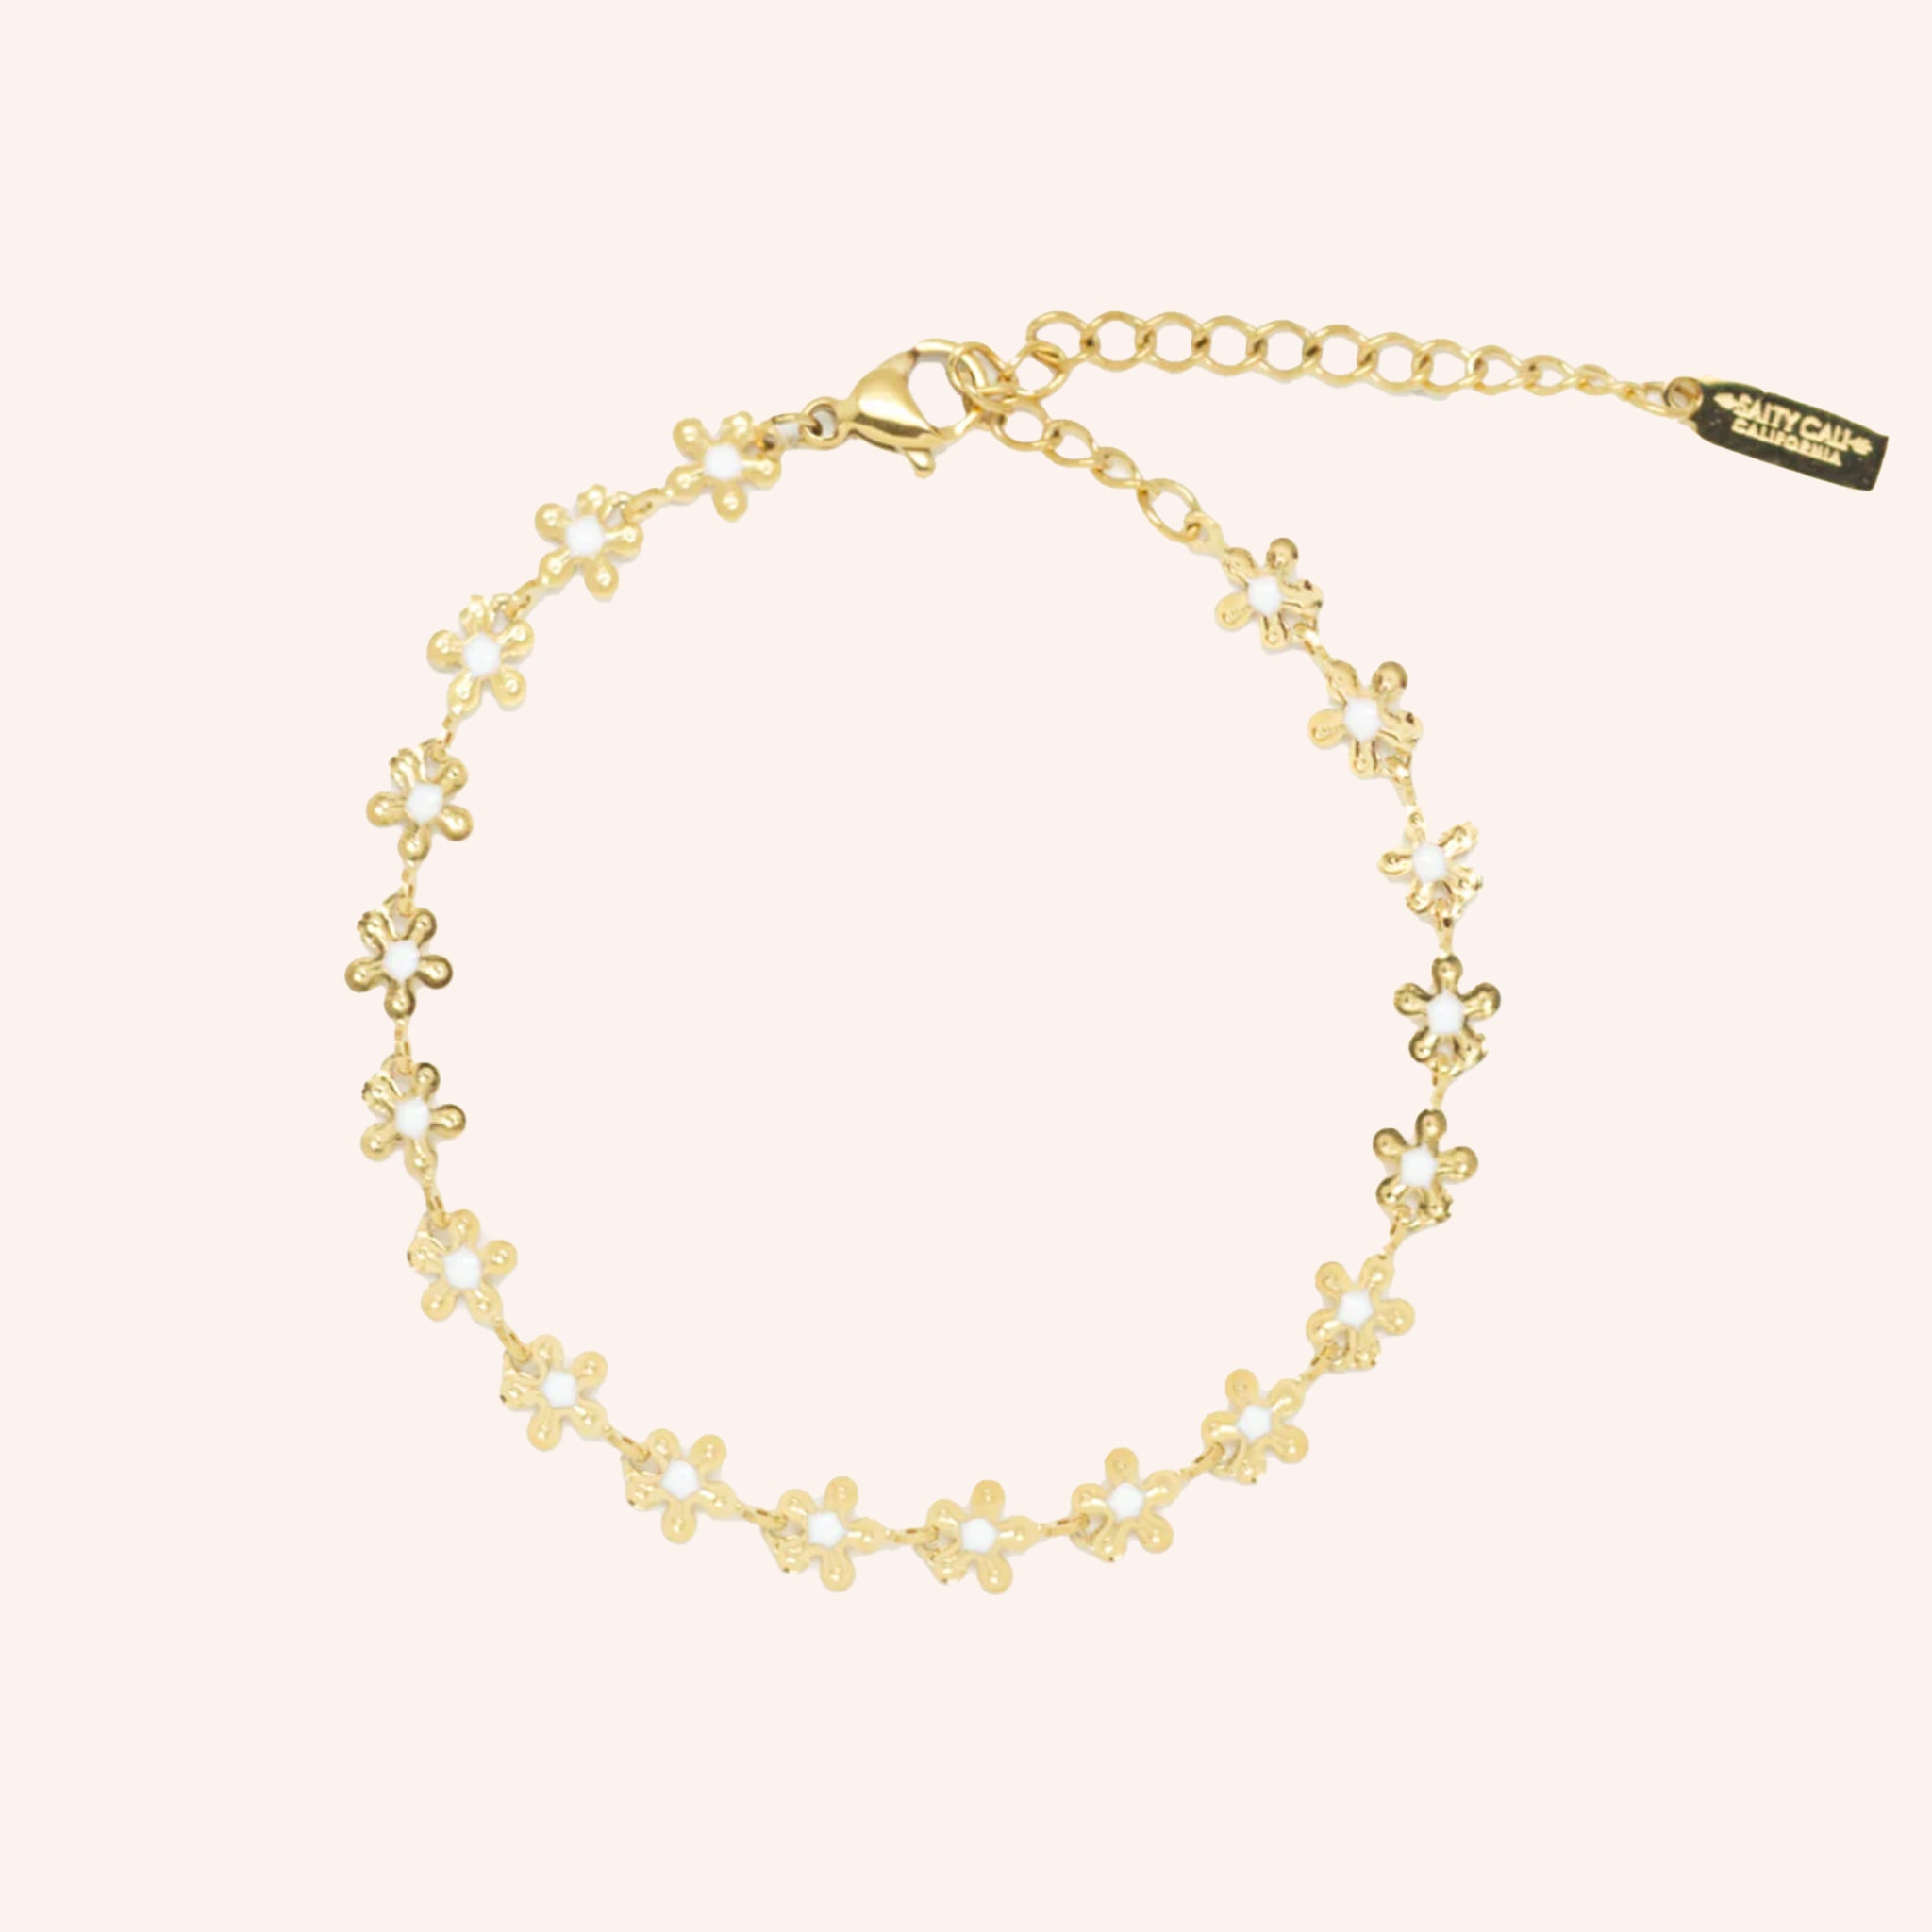 A gold bracelet with daisy shaped chains and white centers. 